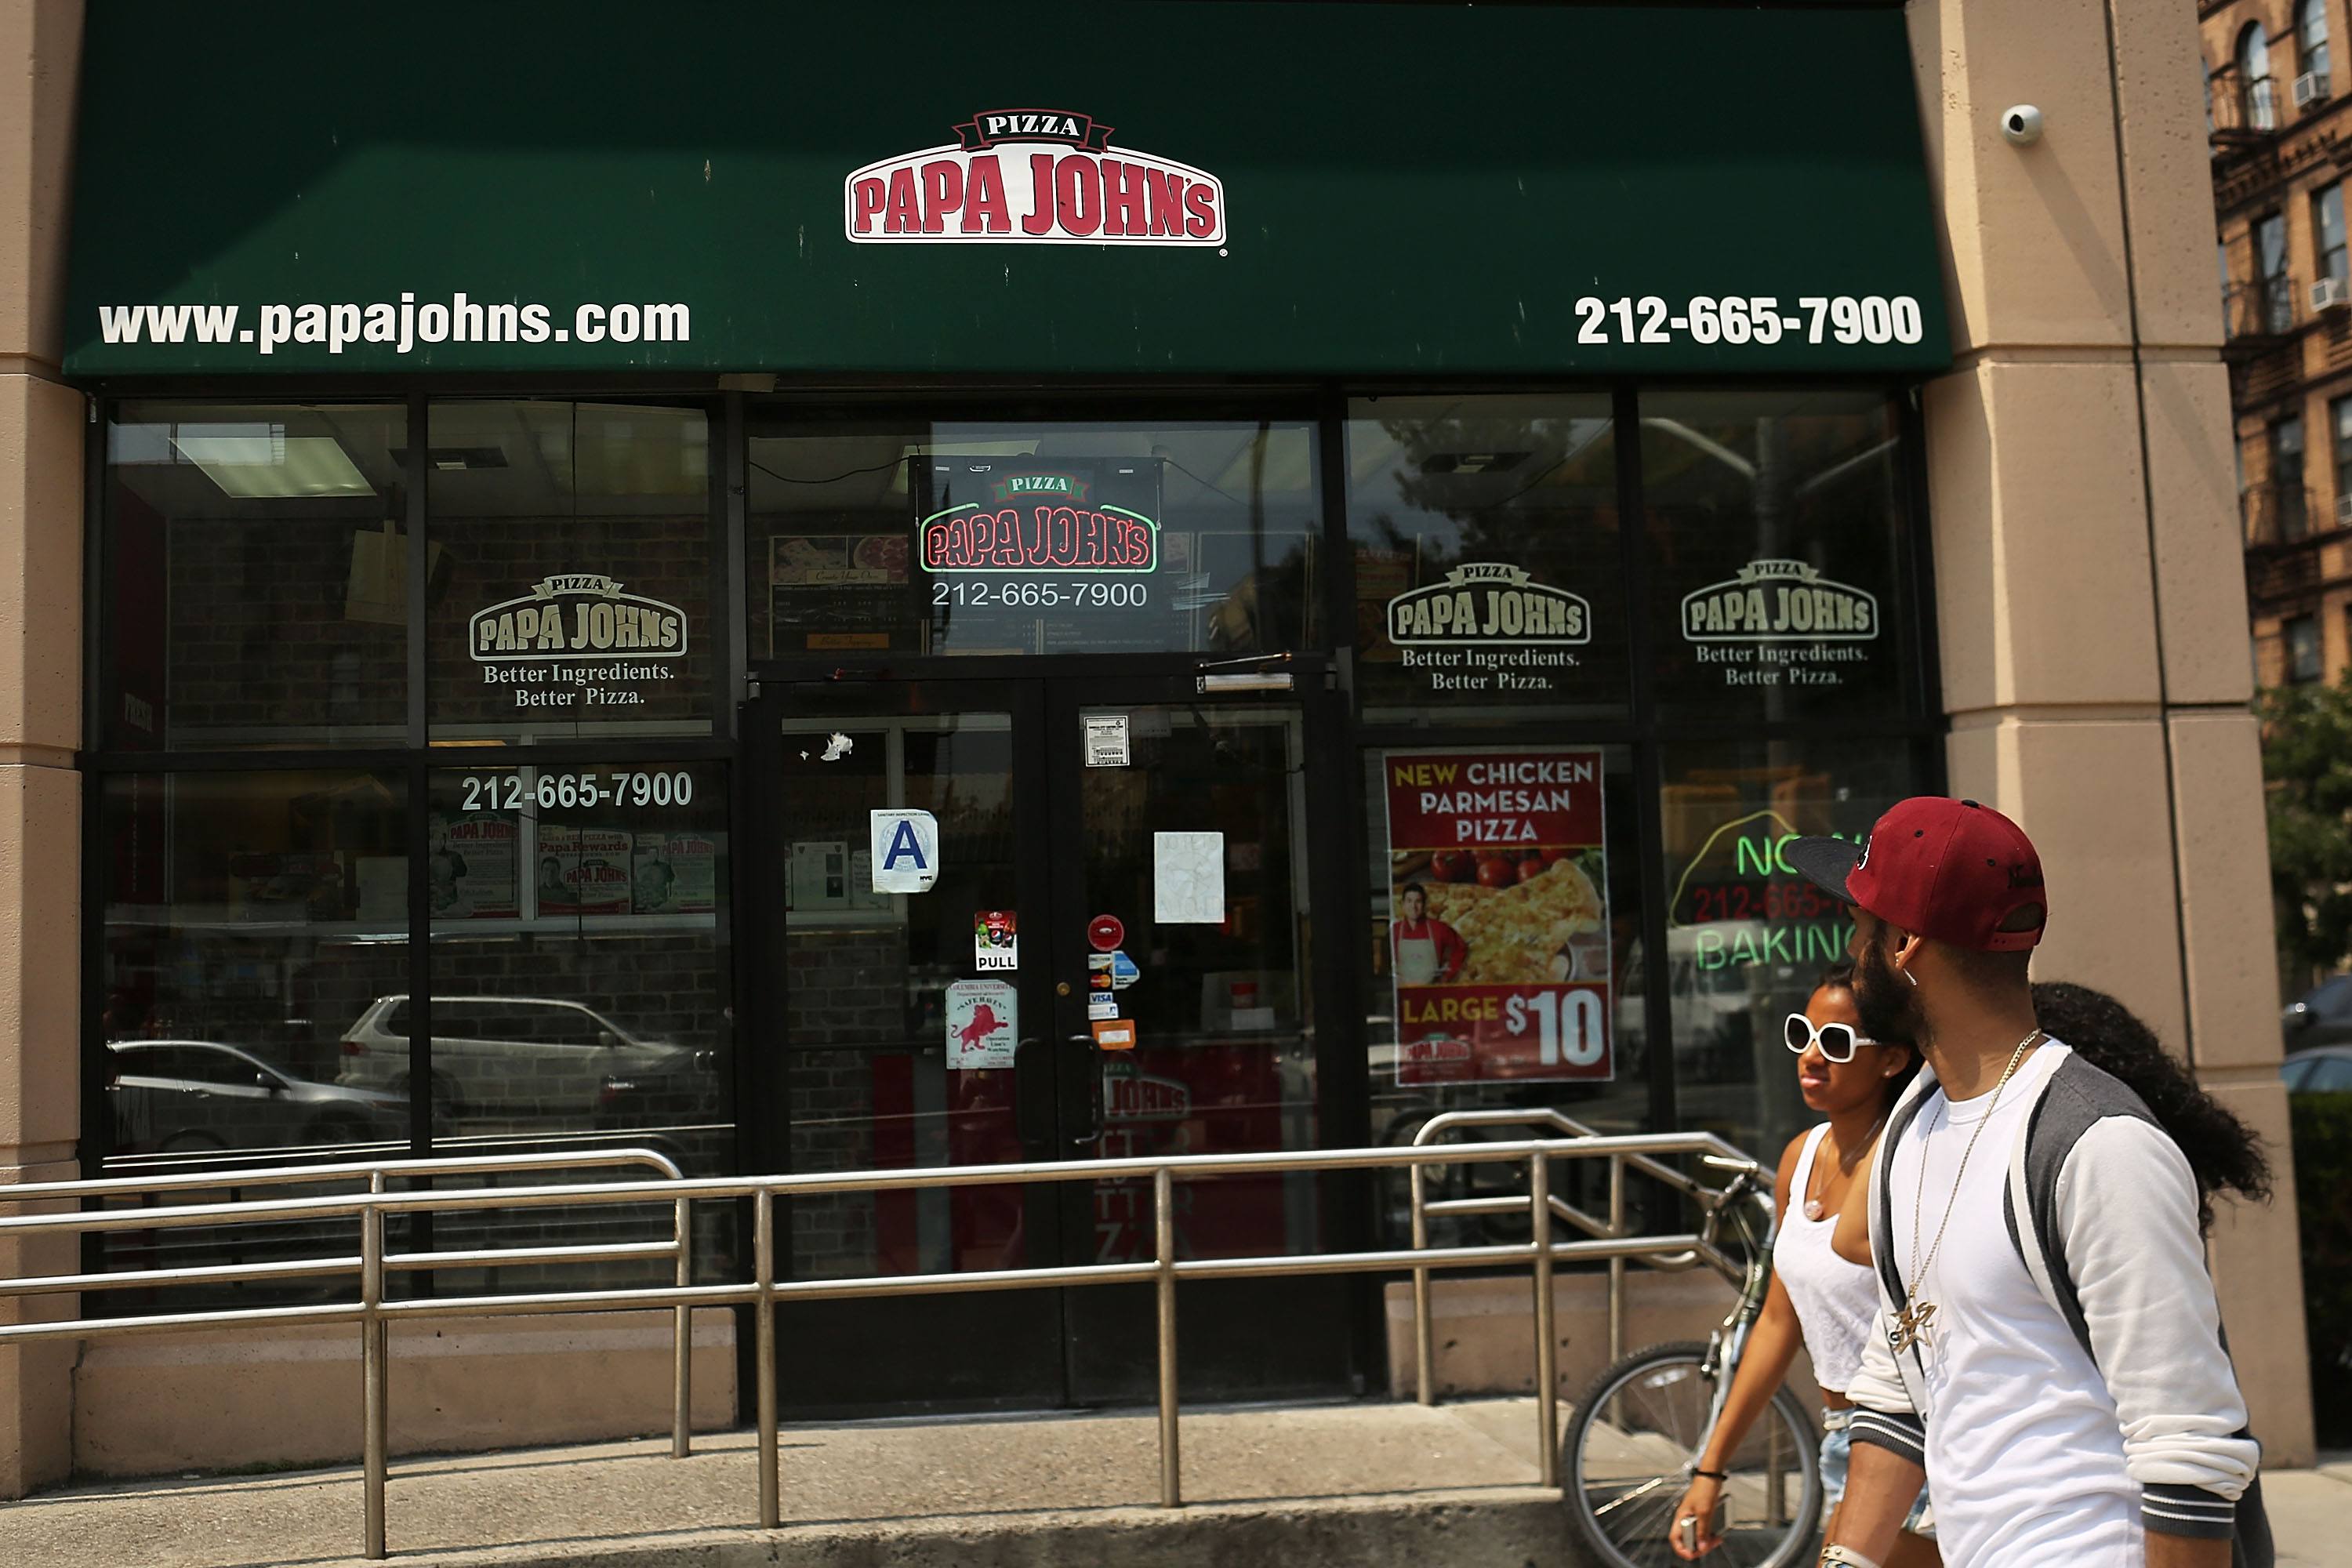 People walk by a Papa Johns pizza restaurant on August 9, 2012 in New York City. 